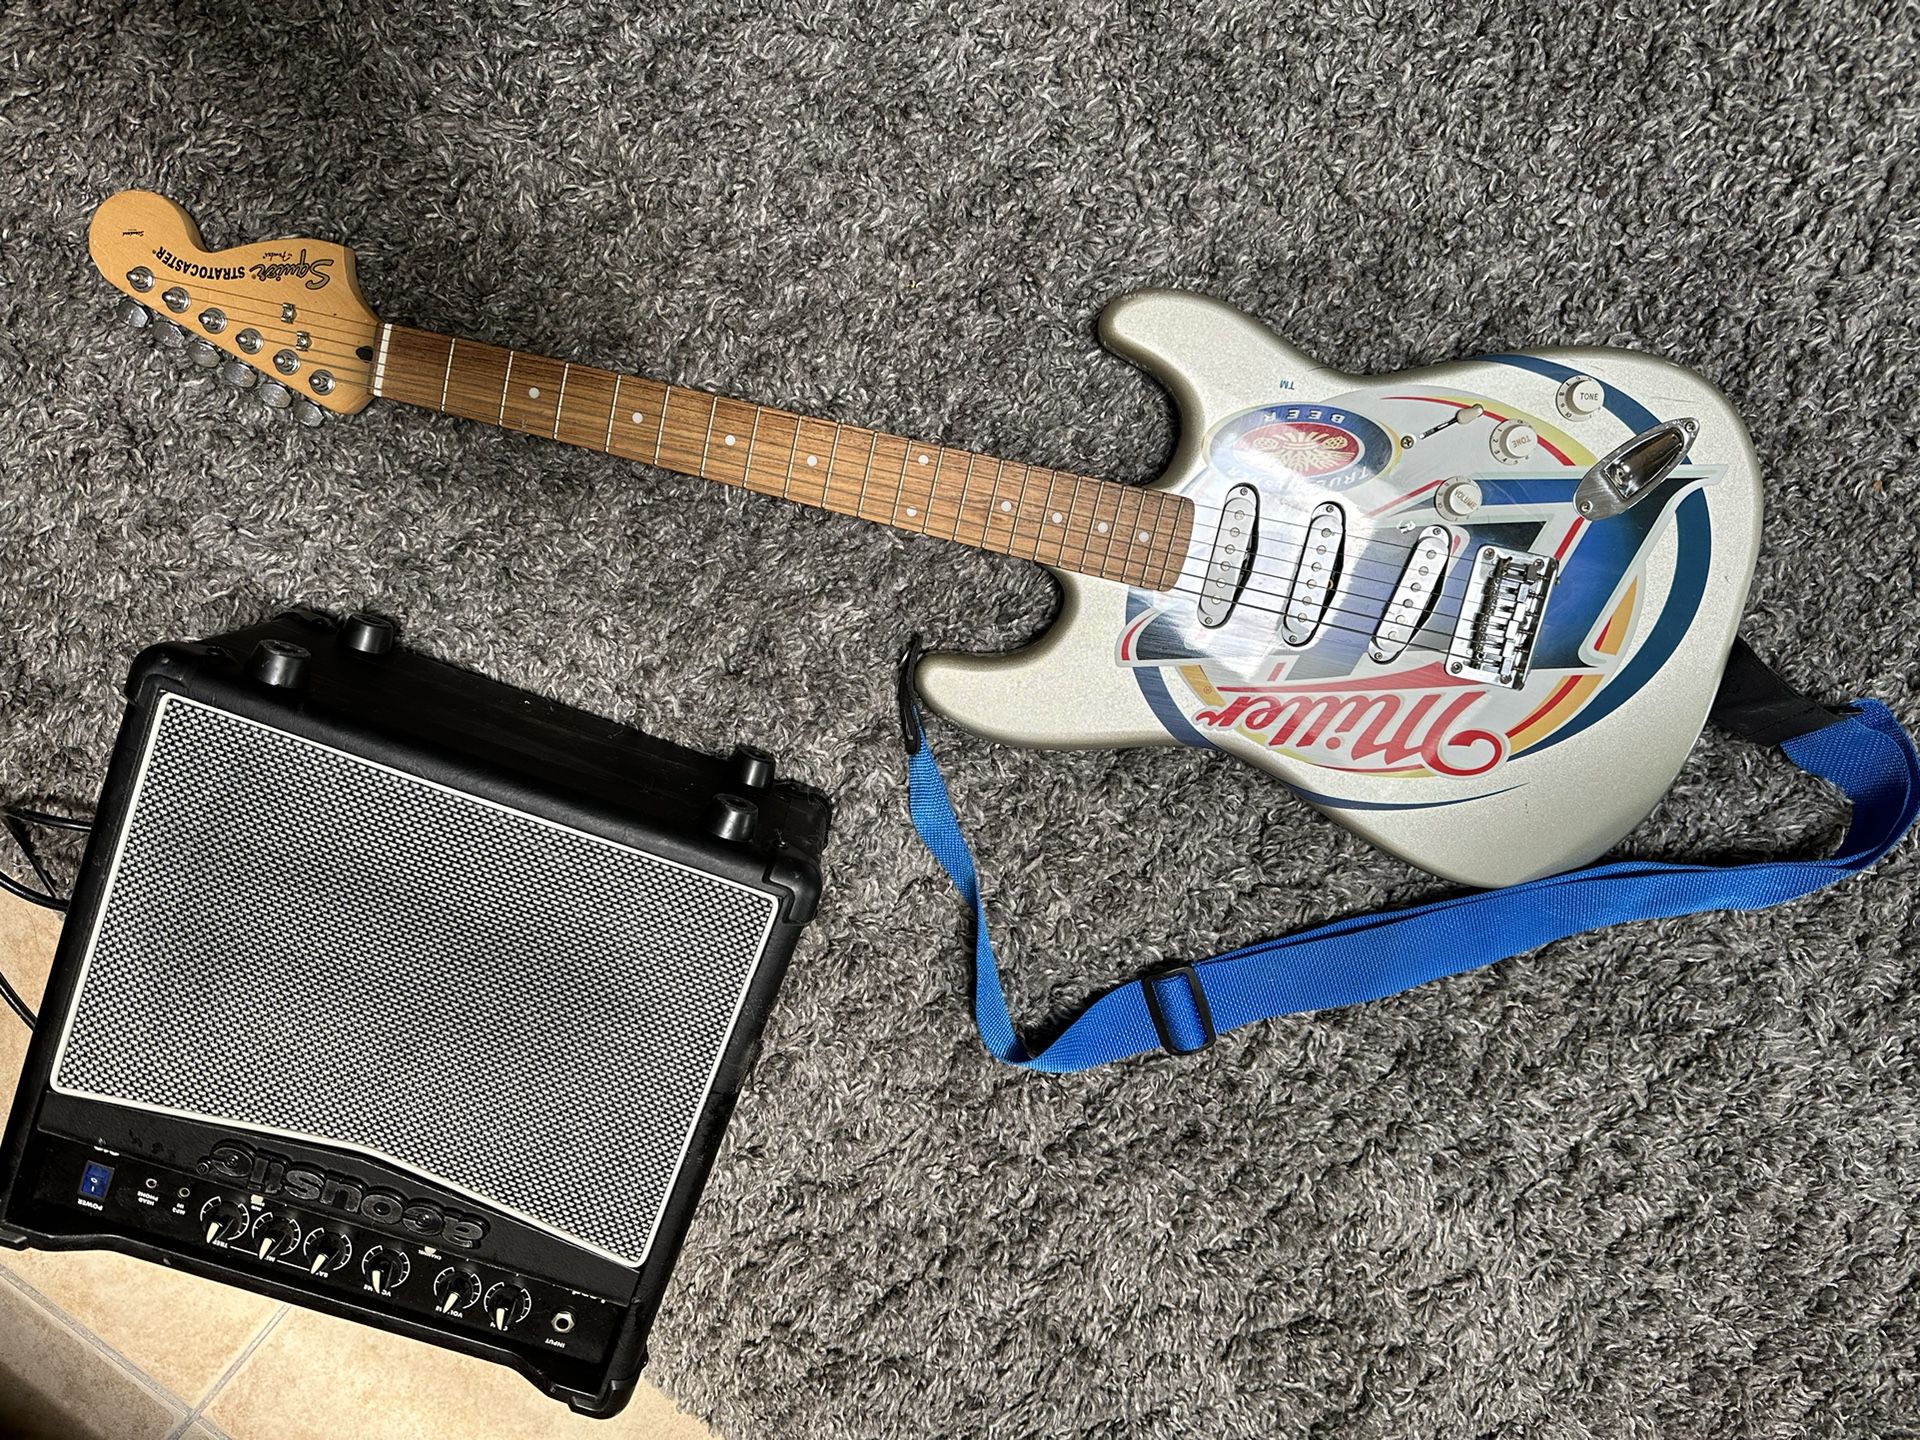 2005 Squier Limited Edition Miller Light Stratocaster + Acoustic Lead Series Amplifier 